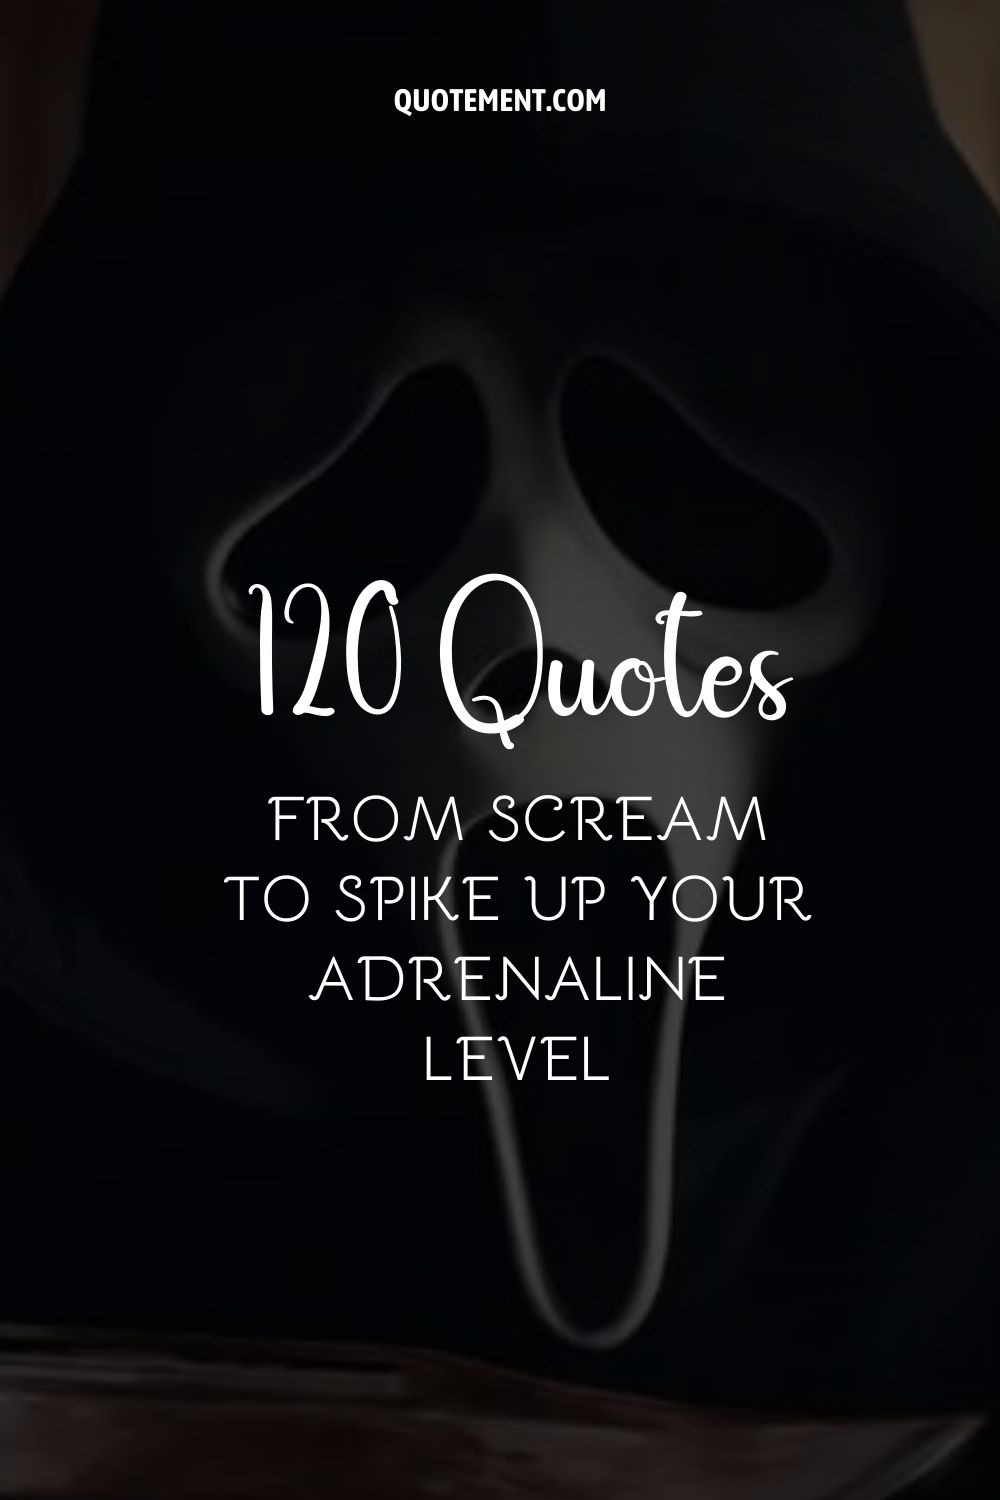 120 Quotes From Scream To Spike Up Your Adrenaline Level